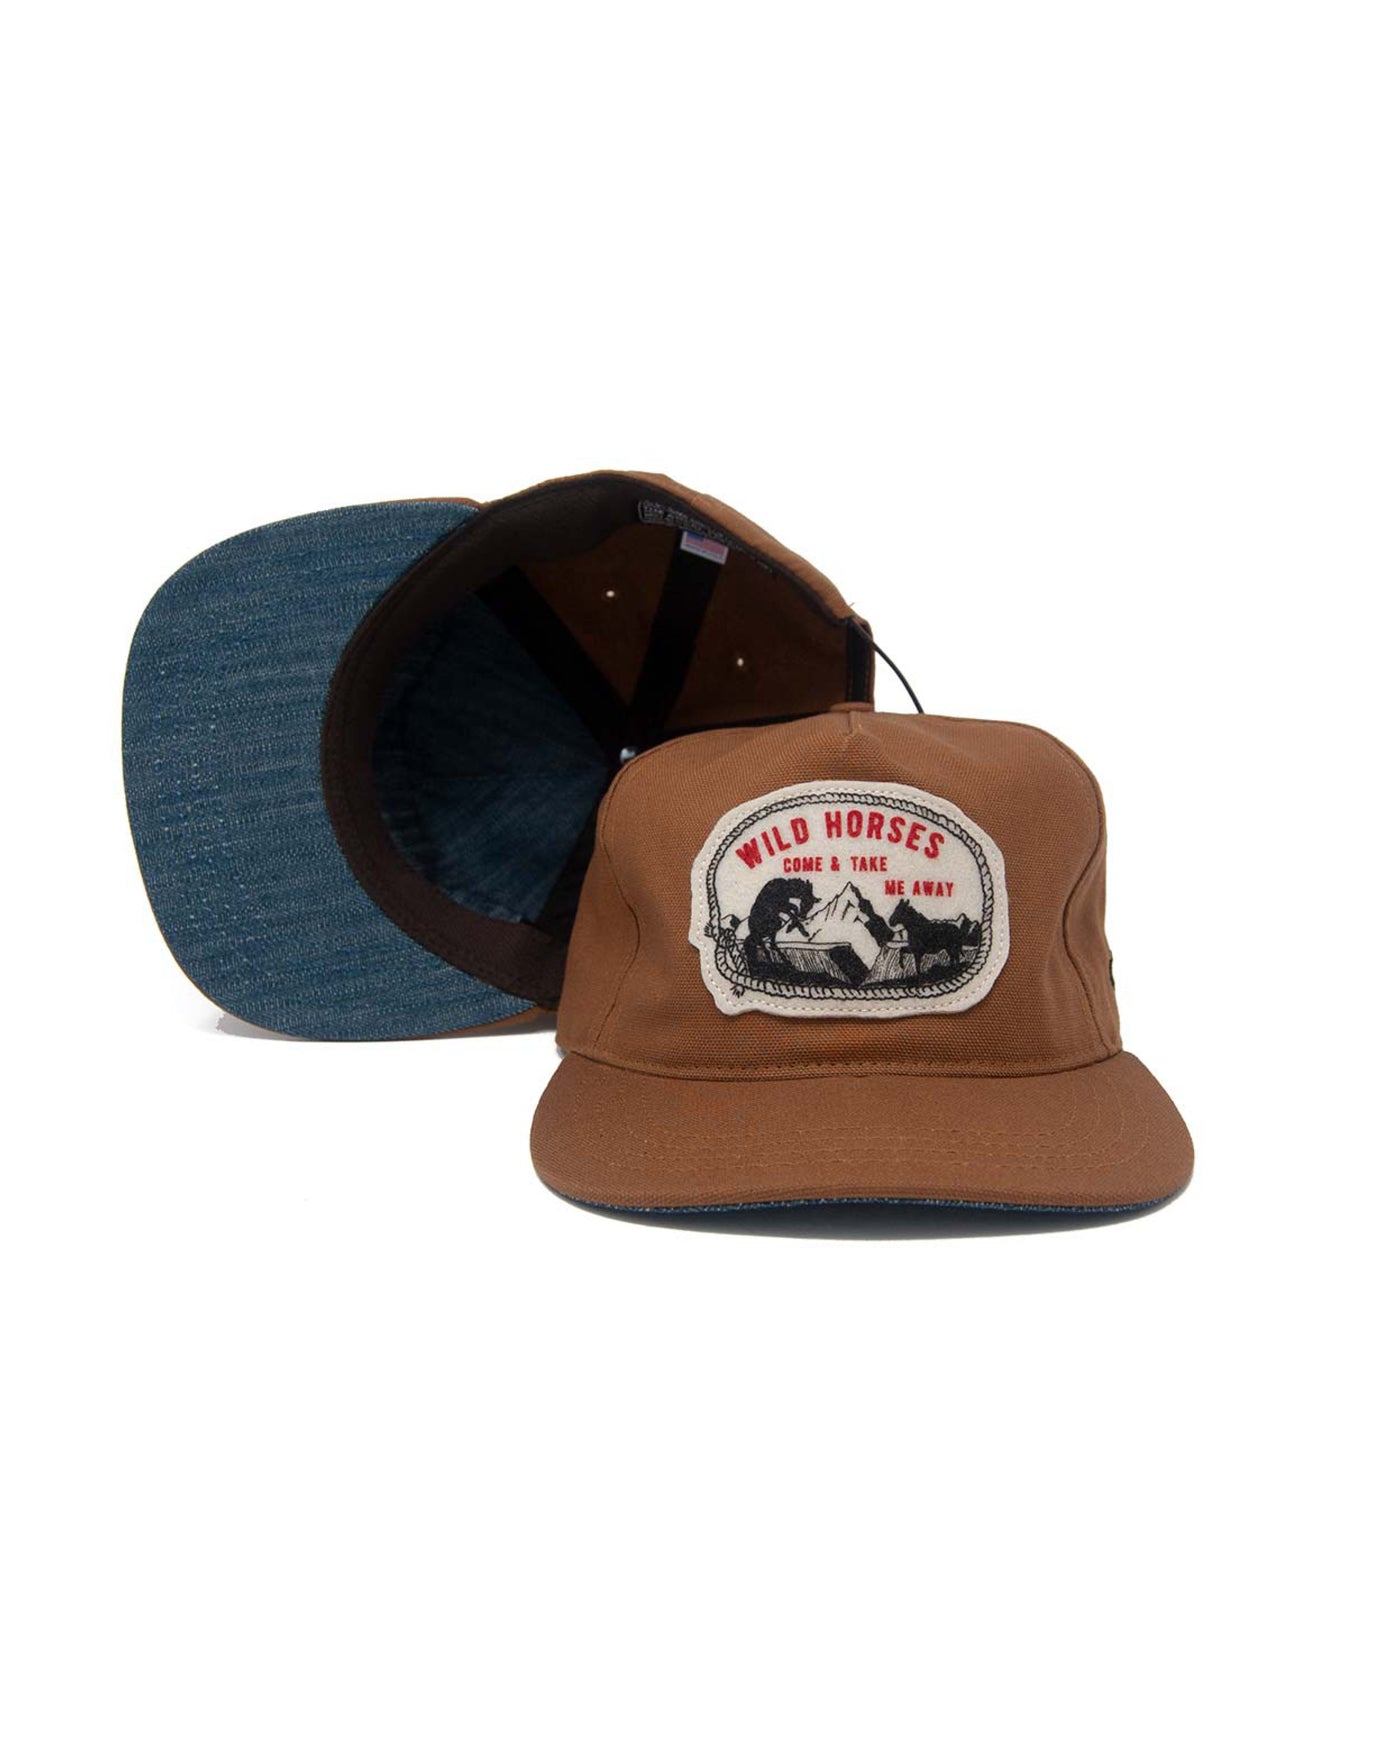 T.A.C Wild Horses II Strapback Ranch Brown